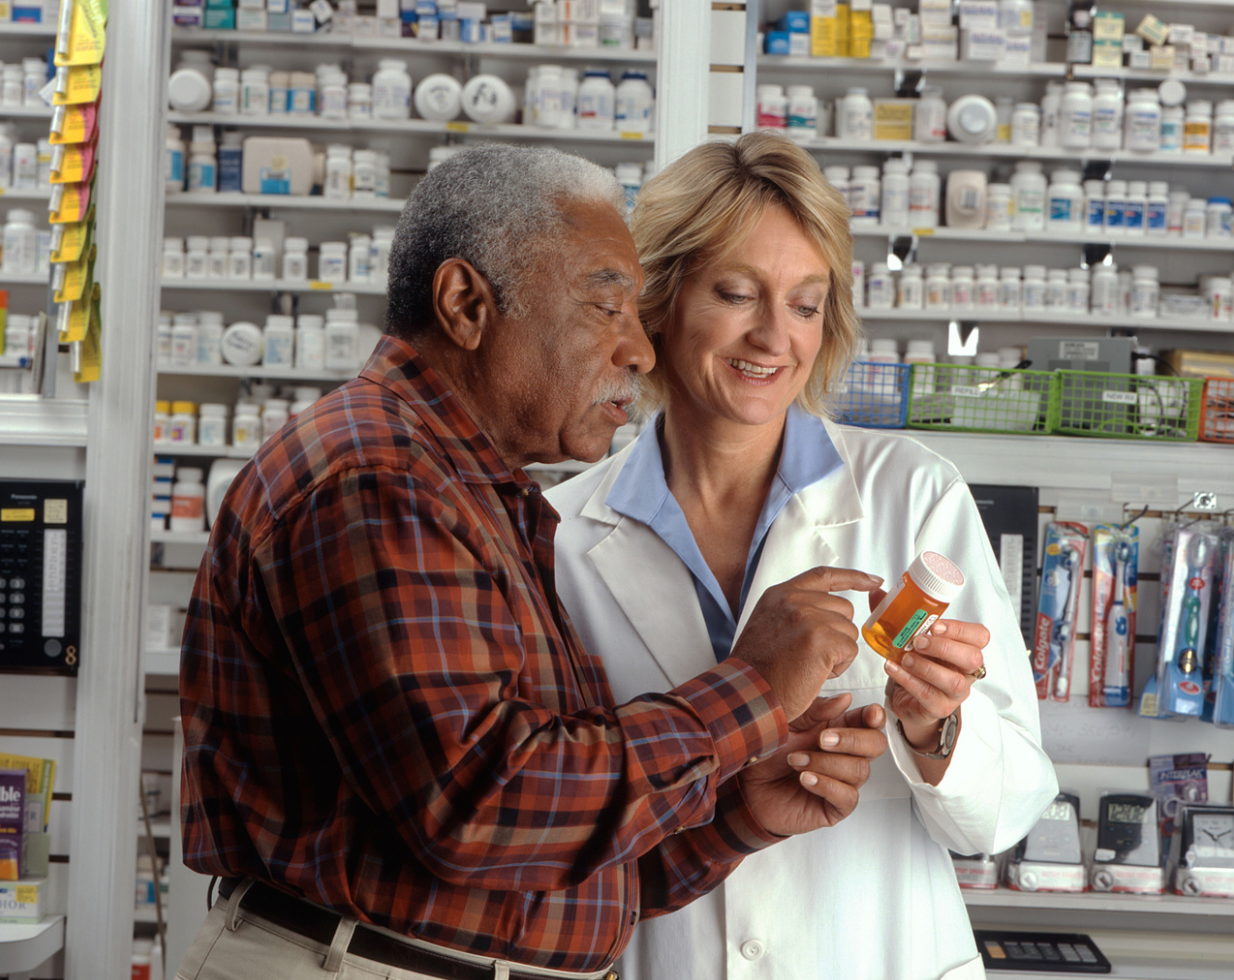 Pharmacists Play a Vital Role in Generic Drug Product Selection